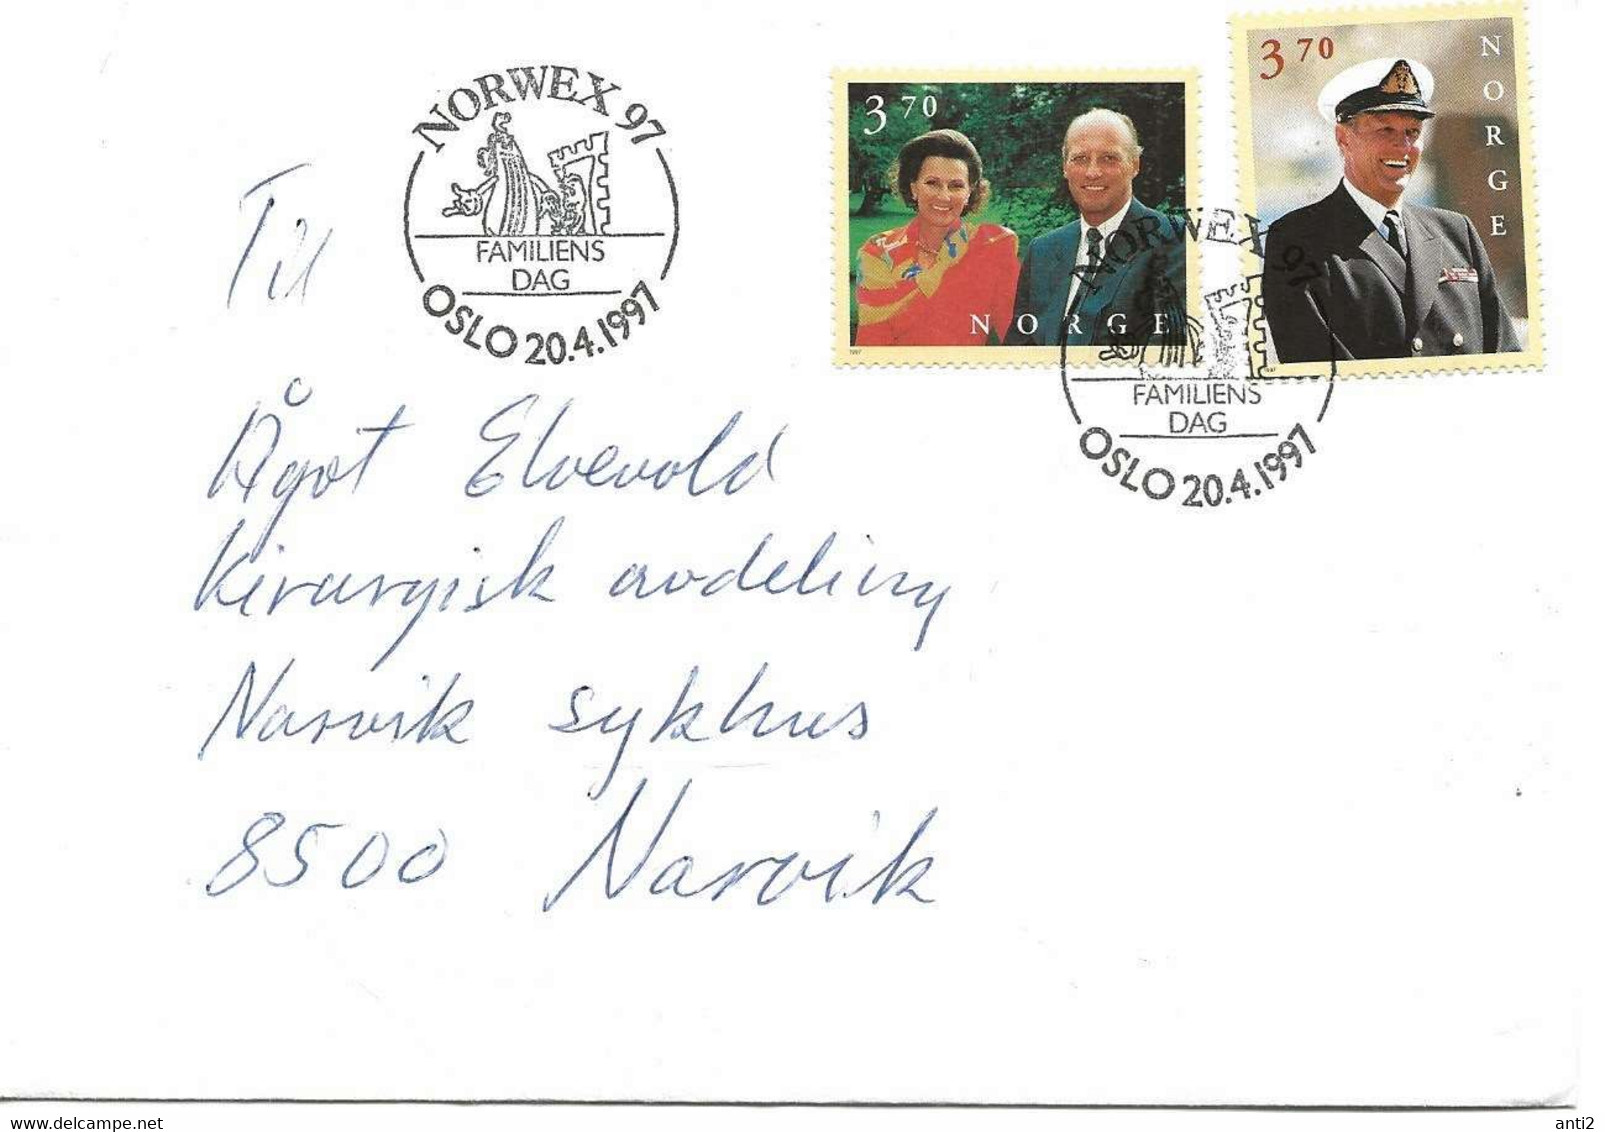 Norway 1997  Cover With Cancelled Norwex 97 - Familys Day, Mi 1244-1245 King And Queen  20.4.97 - Covers & Documents